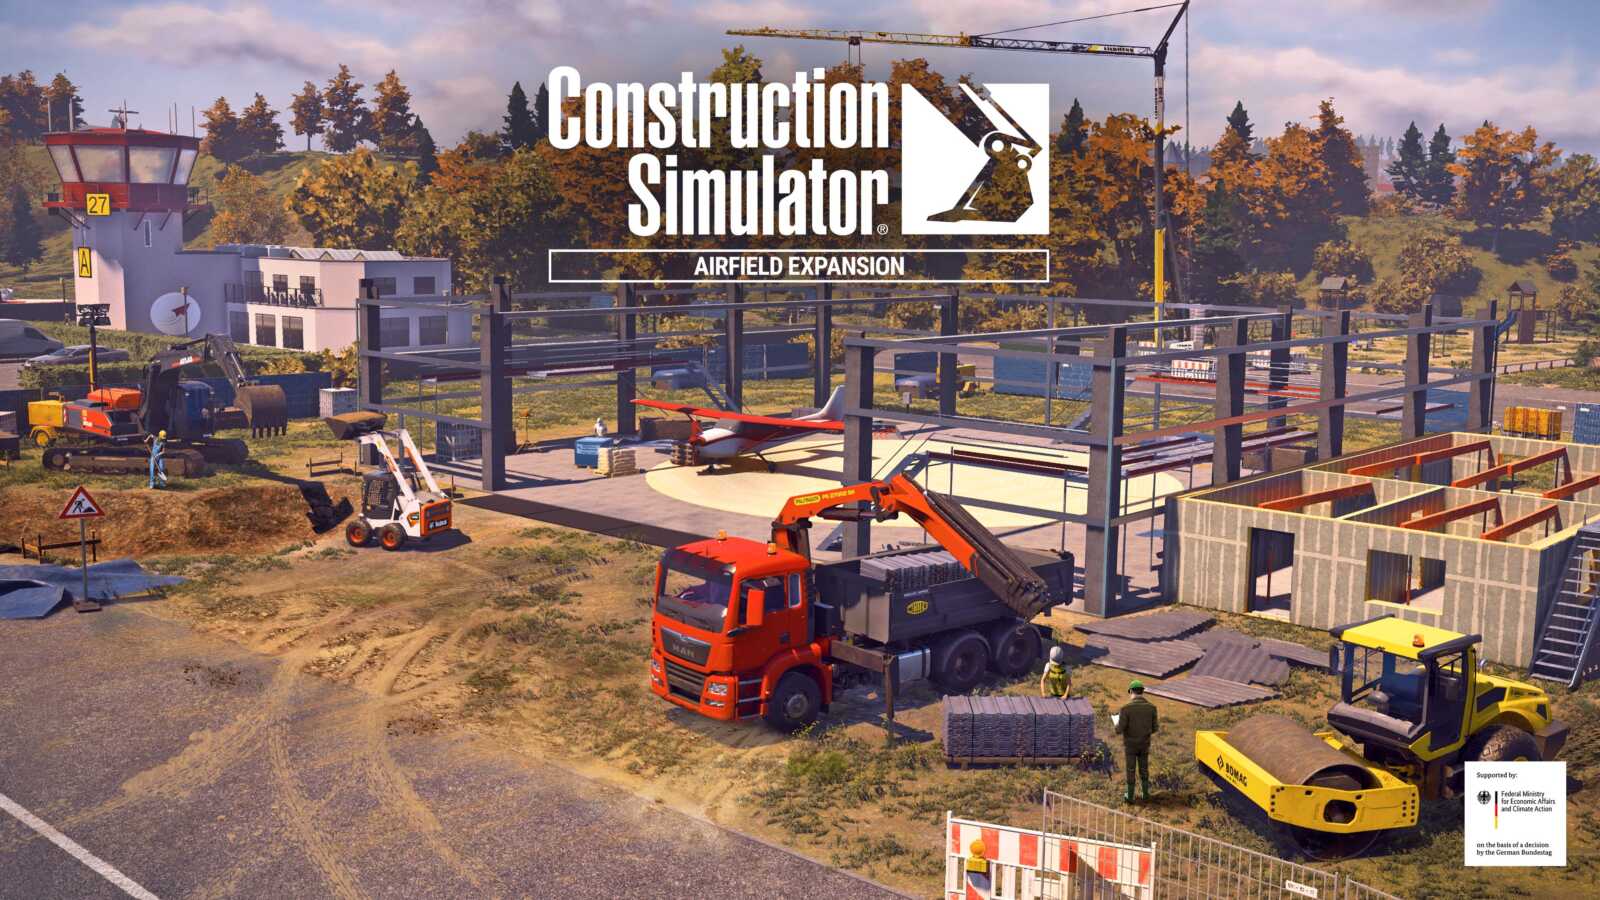 Construction Simulator: Airfield expansion offers an airport construction  campaign